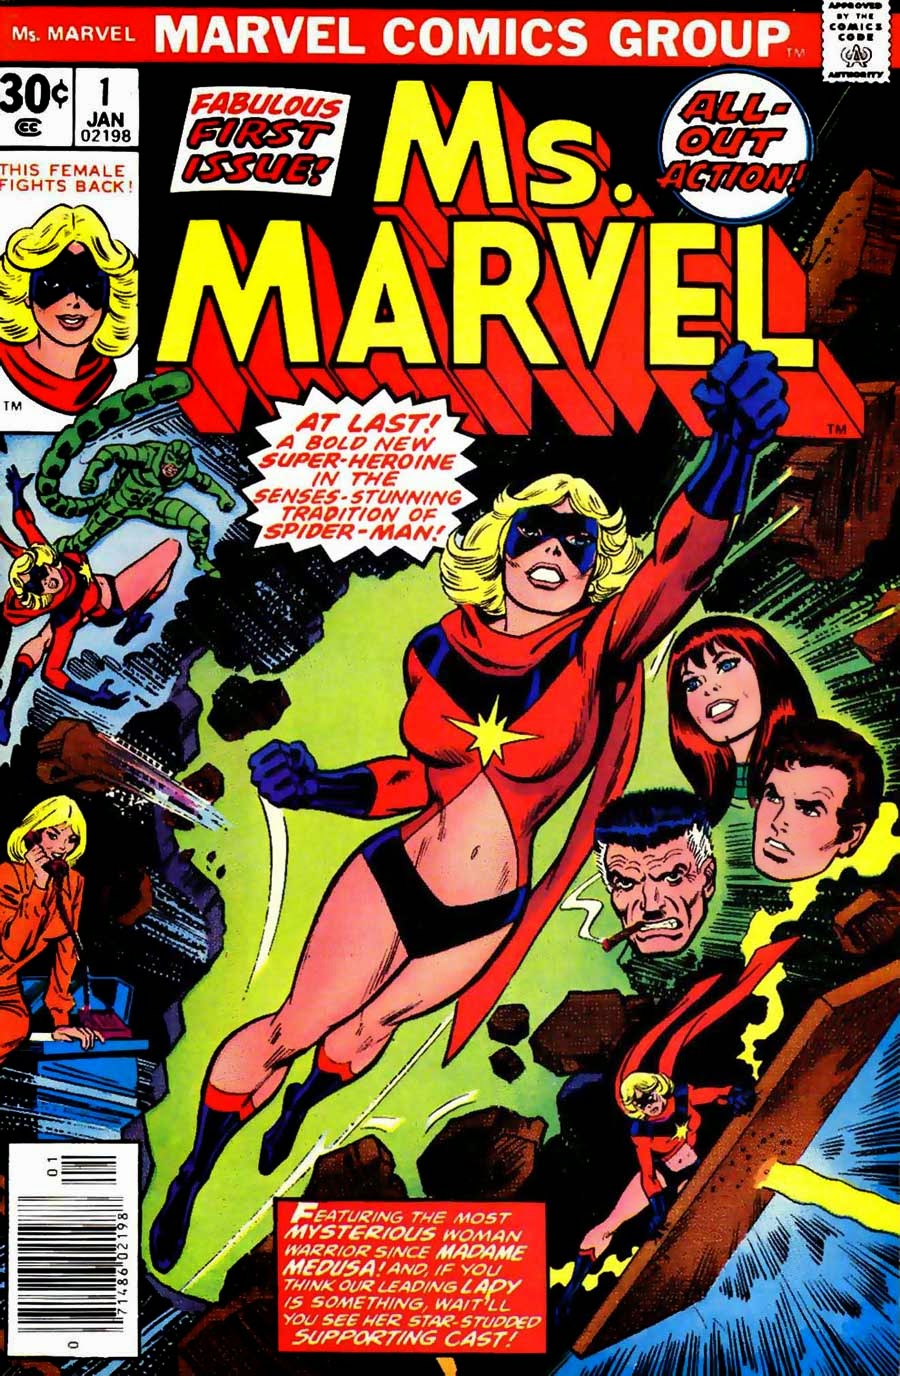 Ms. Marvel #1 key issue marvel 1970s bronze age comic book cover - 1st appearance